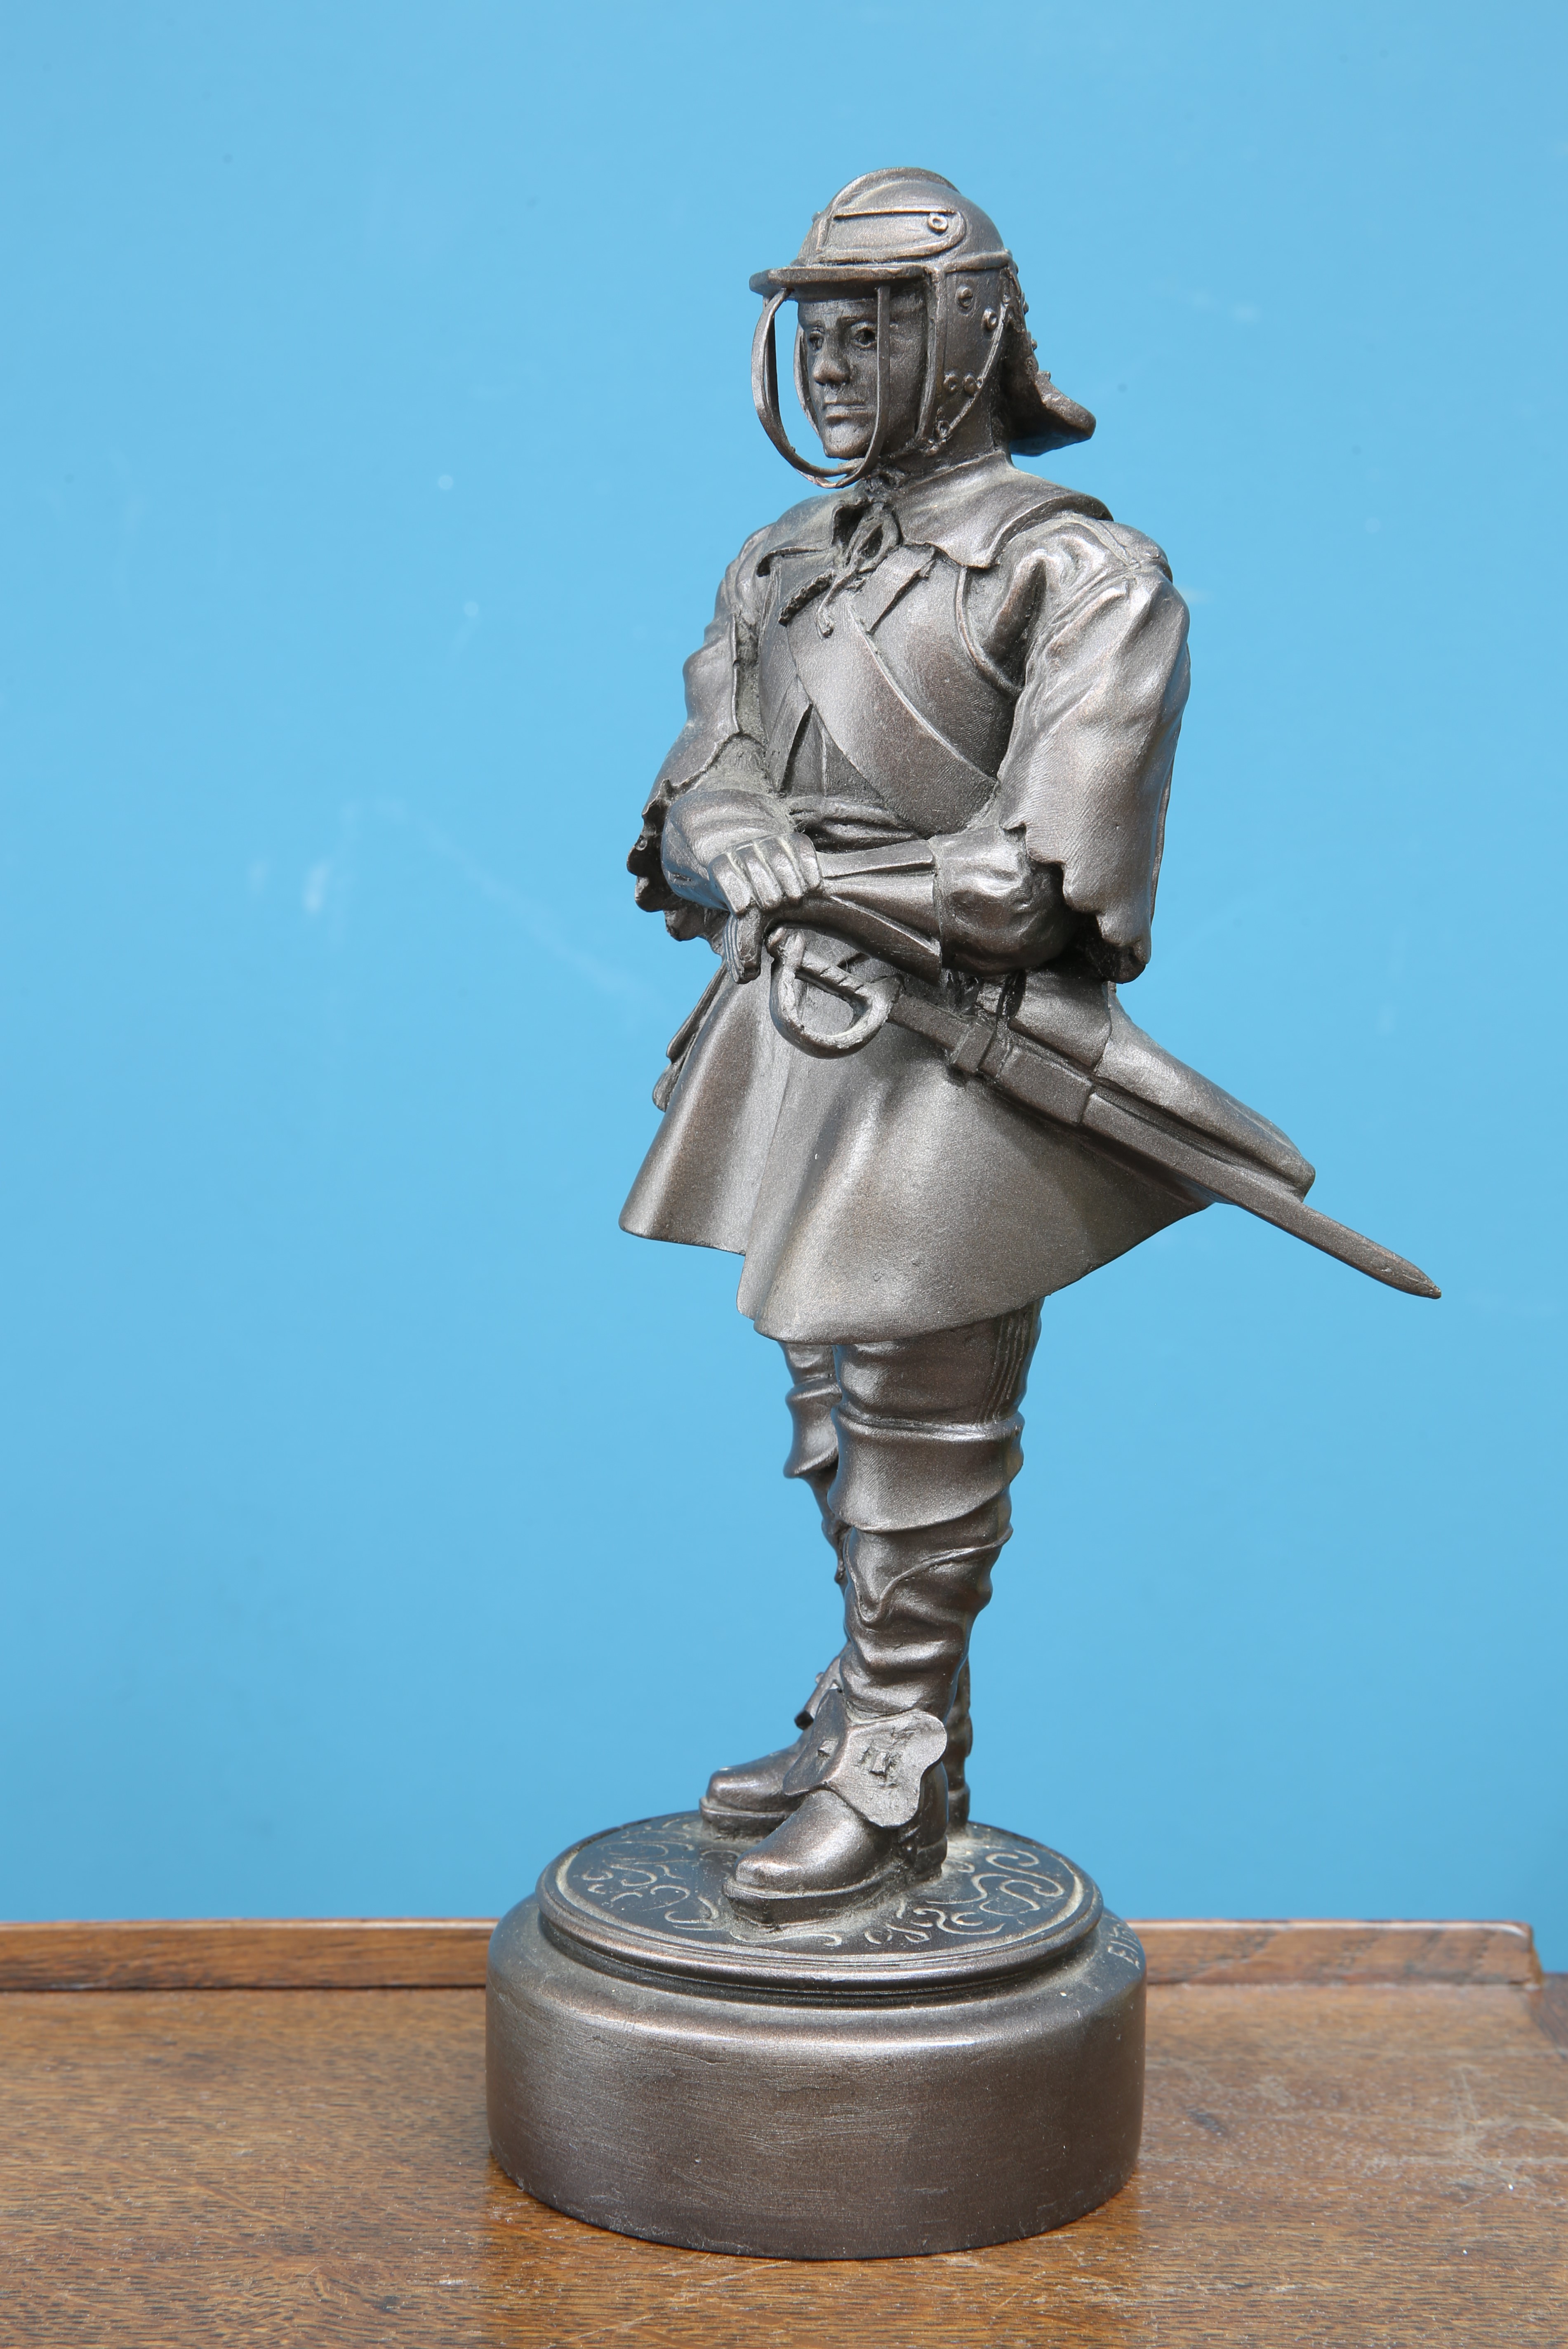 A BRONZED SCULPTURE OF A MILITARY FIGURE